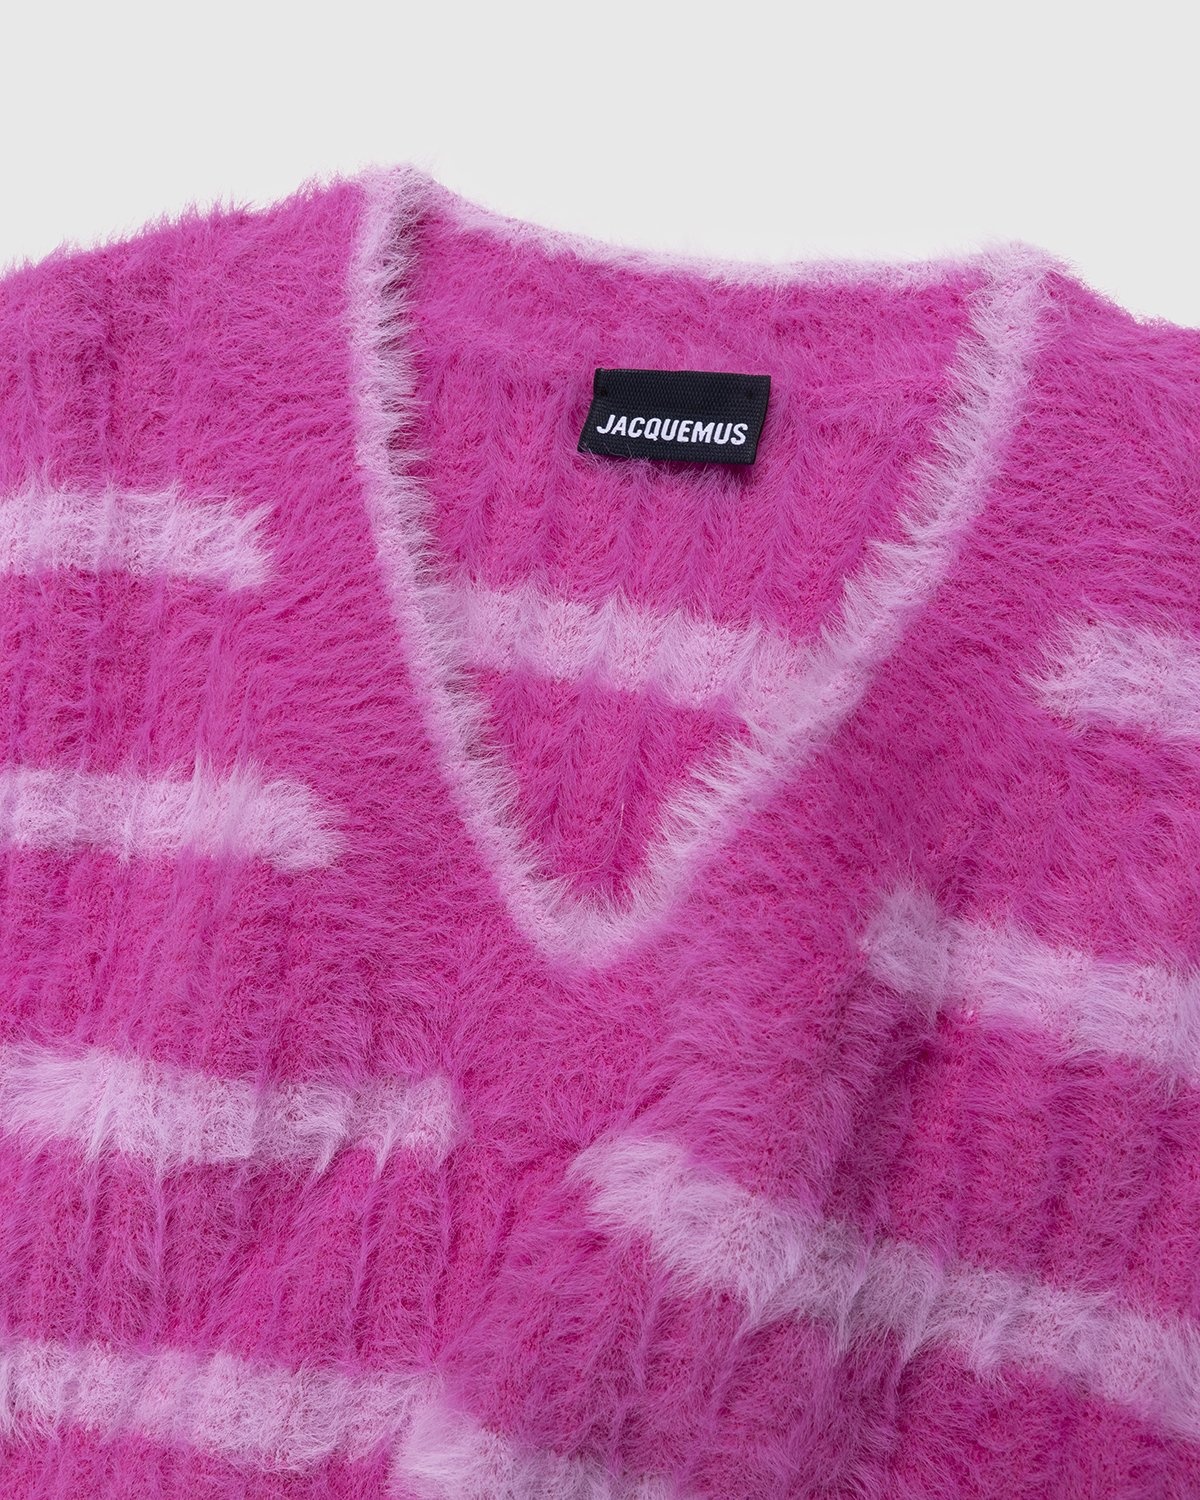 JACQUEMUS – Le Gilet Neve Multi-Pink - Knitwear - Pink - Image 3